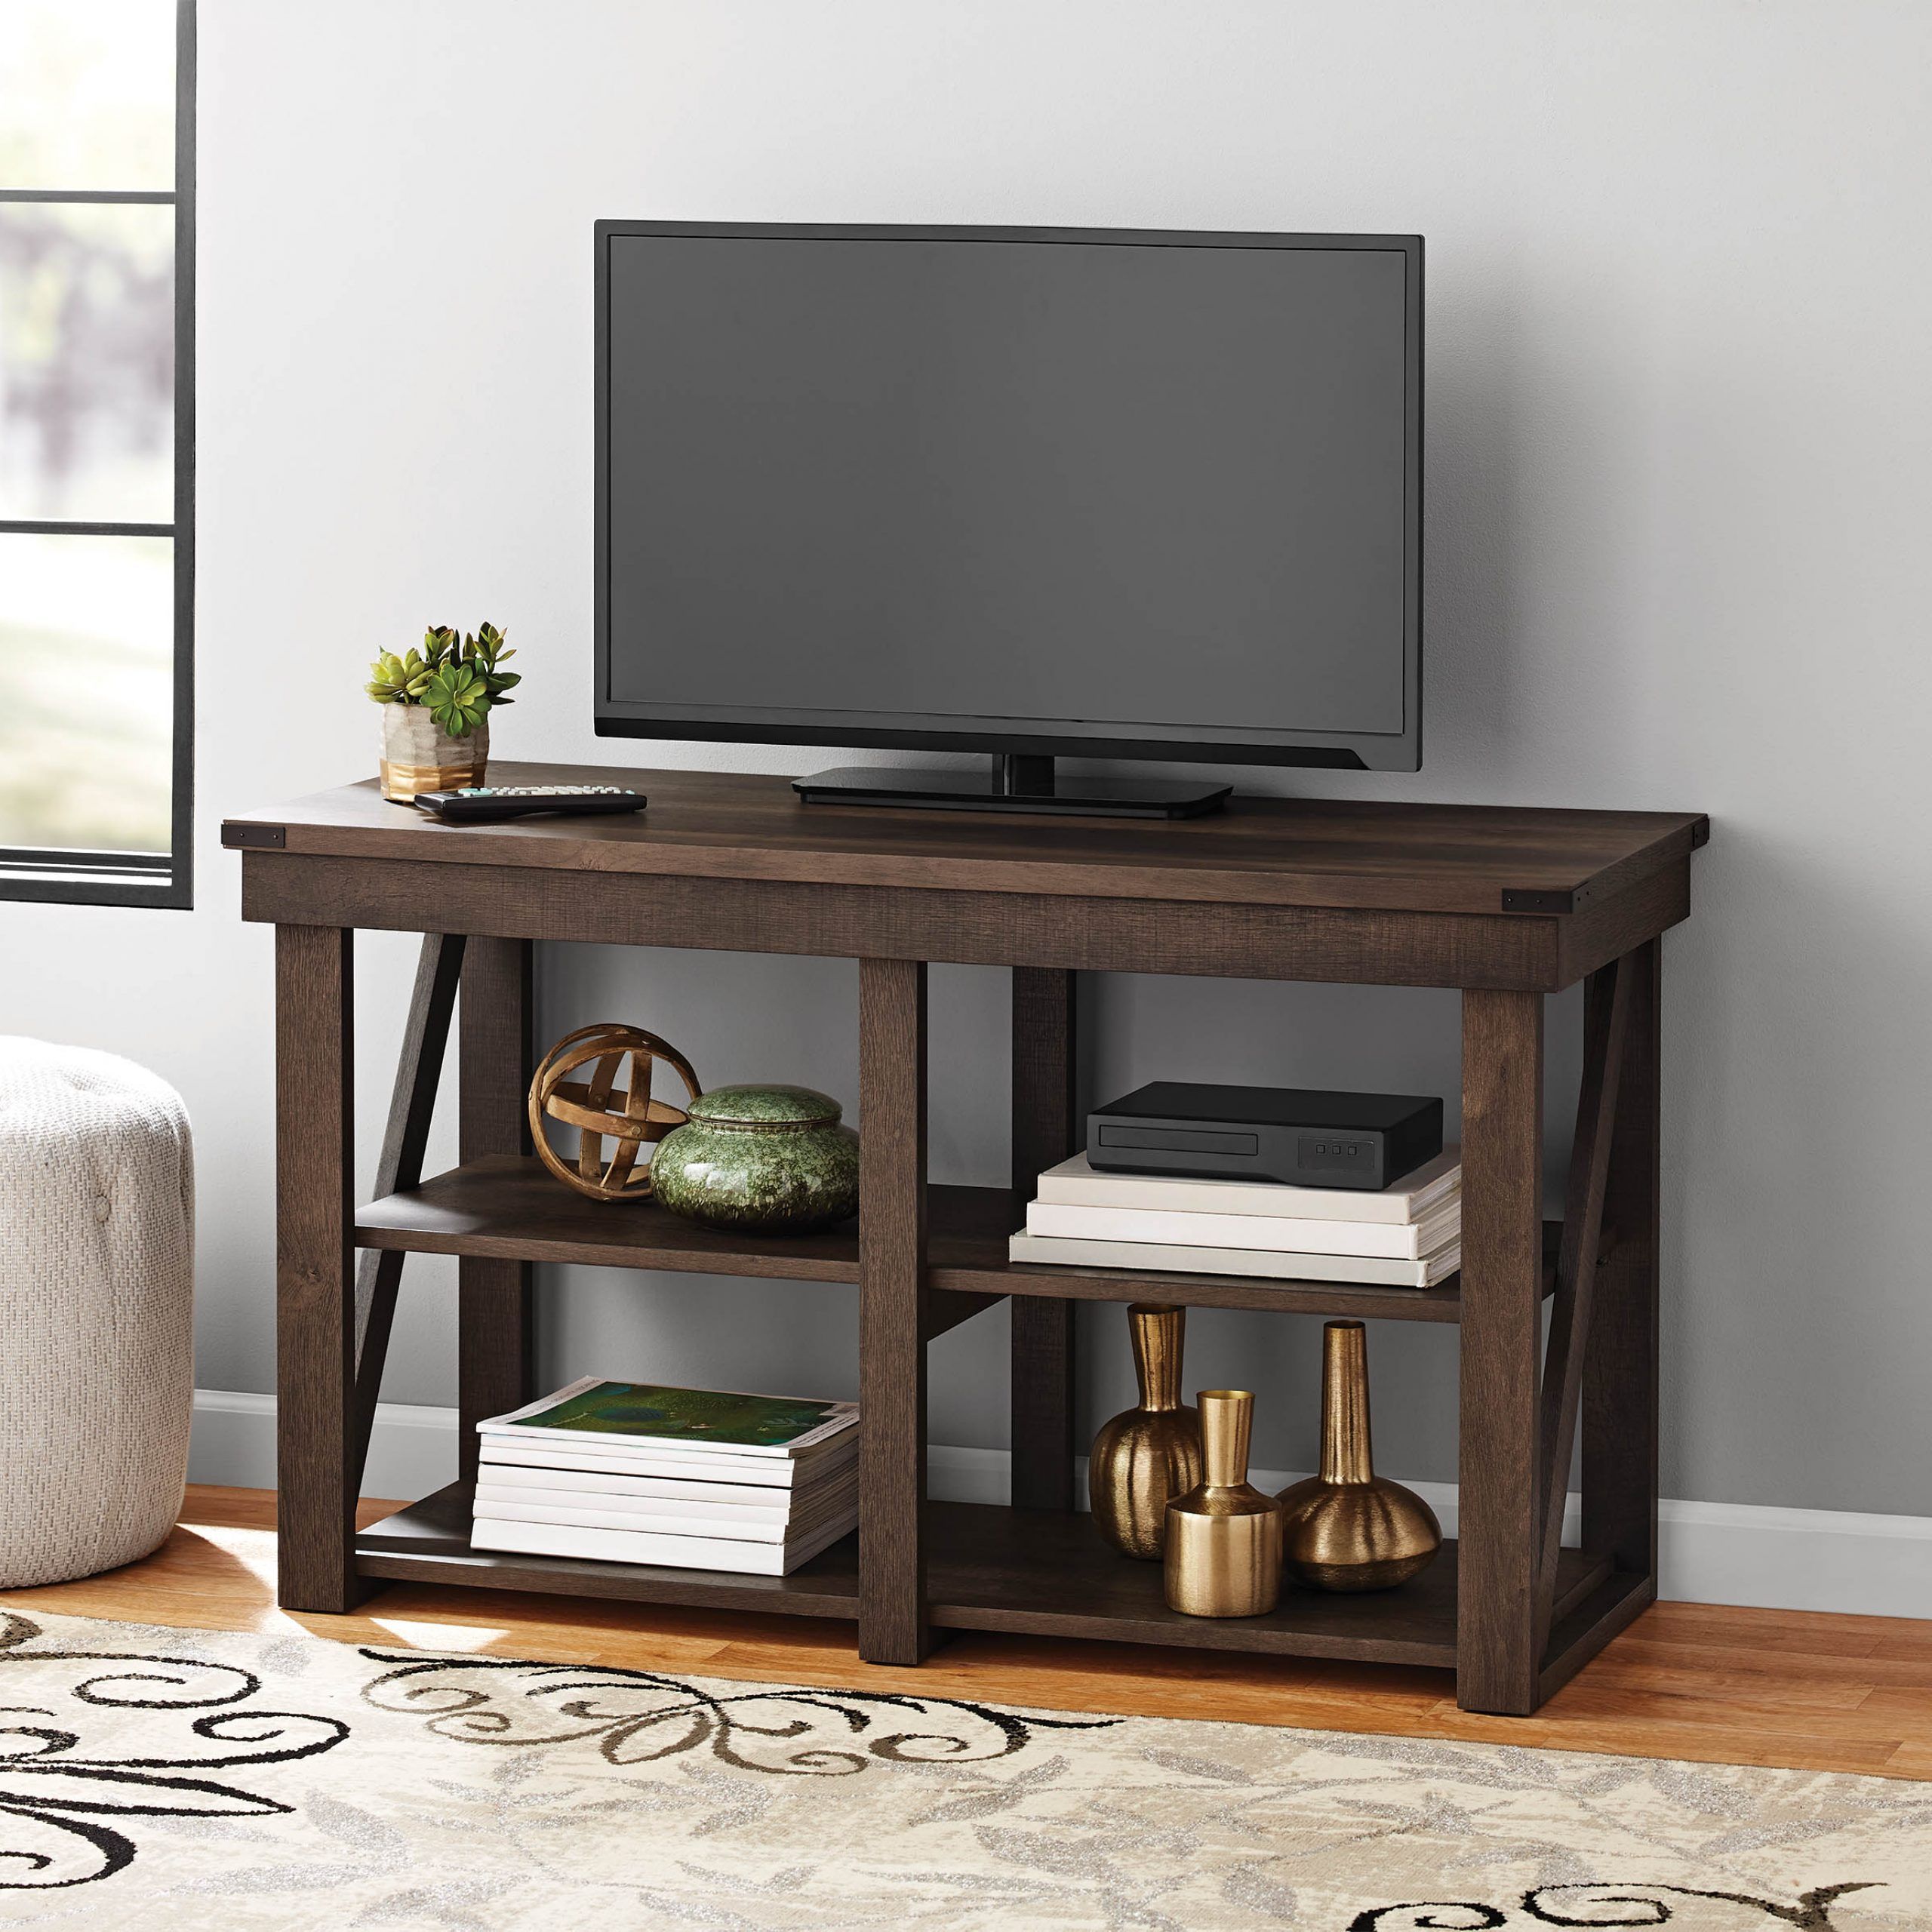 Mainstays Lawson Tv Stand For Tvs Up To 55", Espresso Pertaining To Twila Tv Stands For Tvs Up To 55" (View 8 of 15)